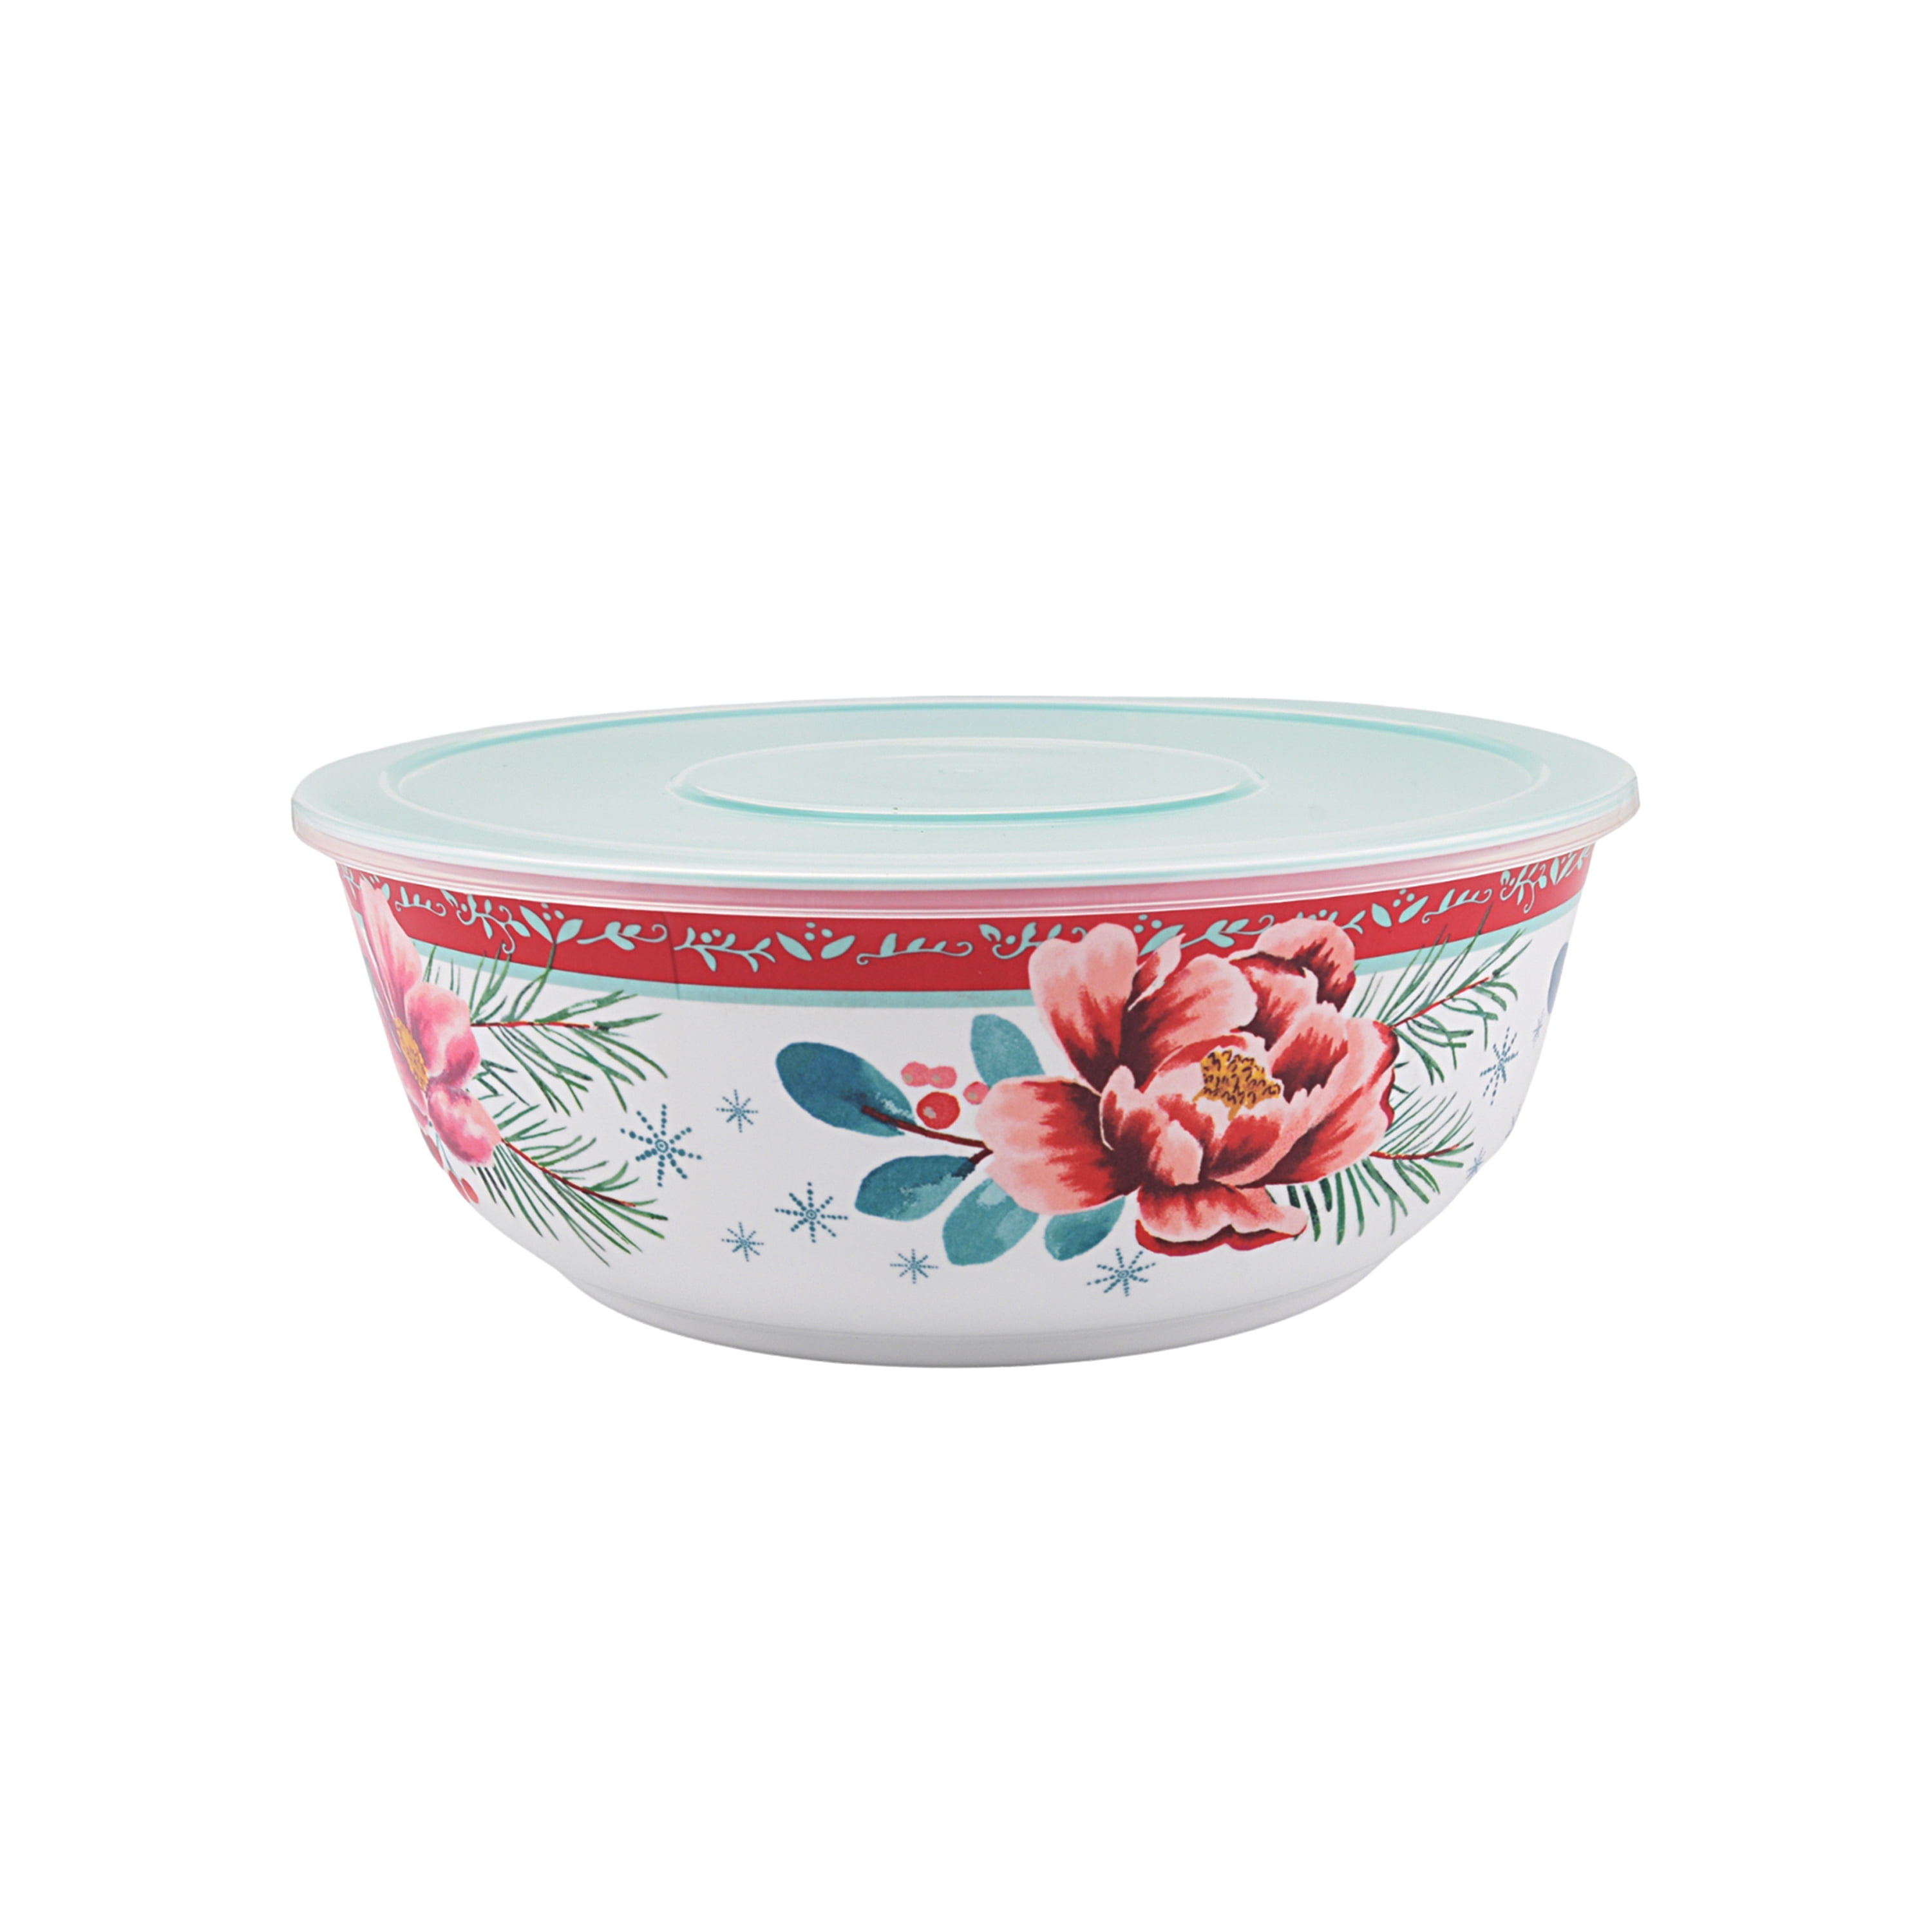 The Pioneer Woman 6-Piece Bowl Set for $15.33 :: Southern Savers